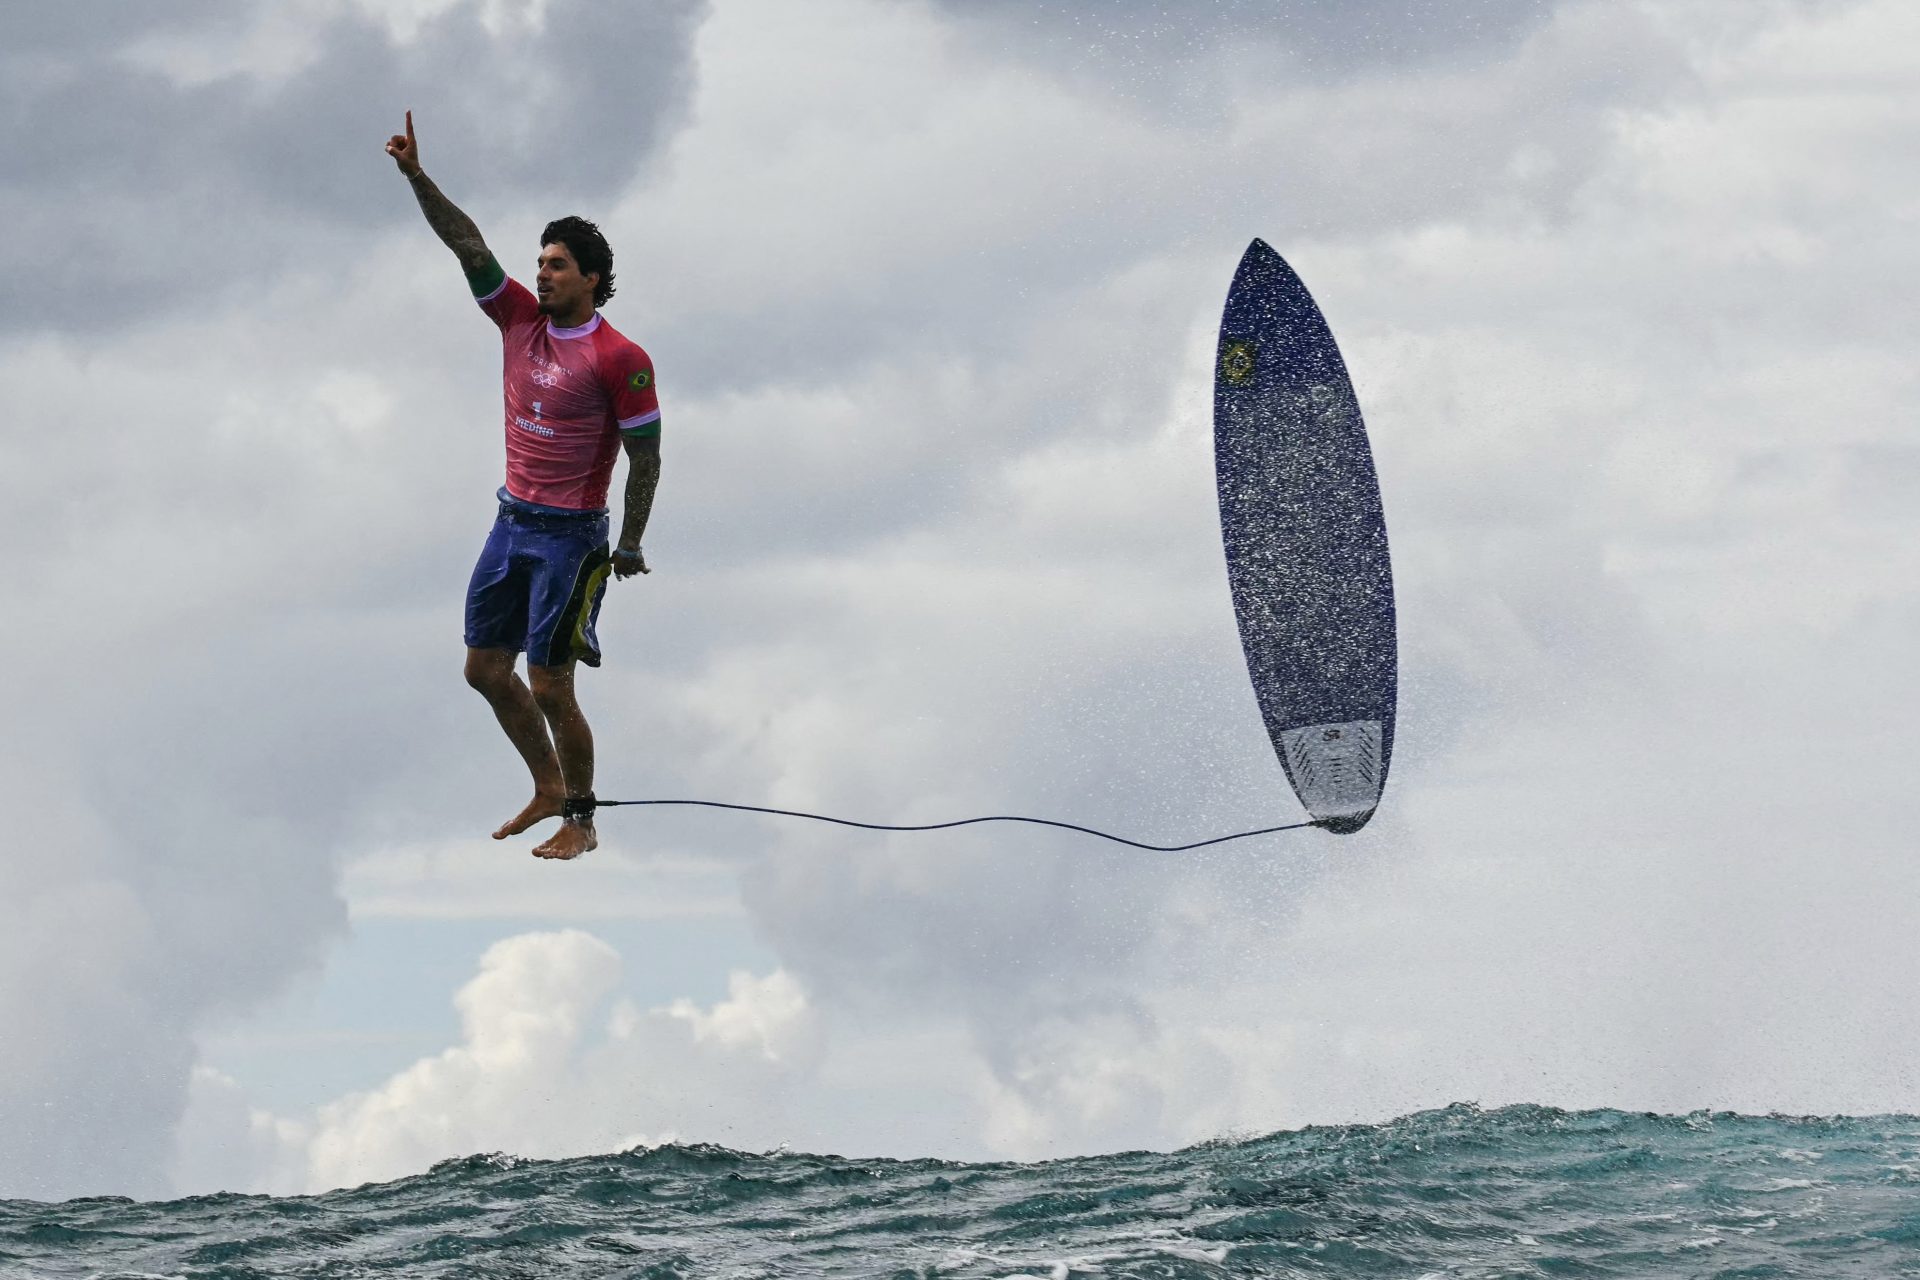 Gabriel Medina excels in surfing event and stars in best photo of Olympics